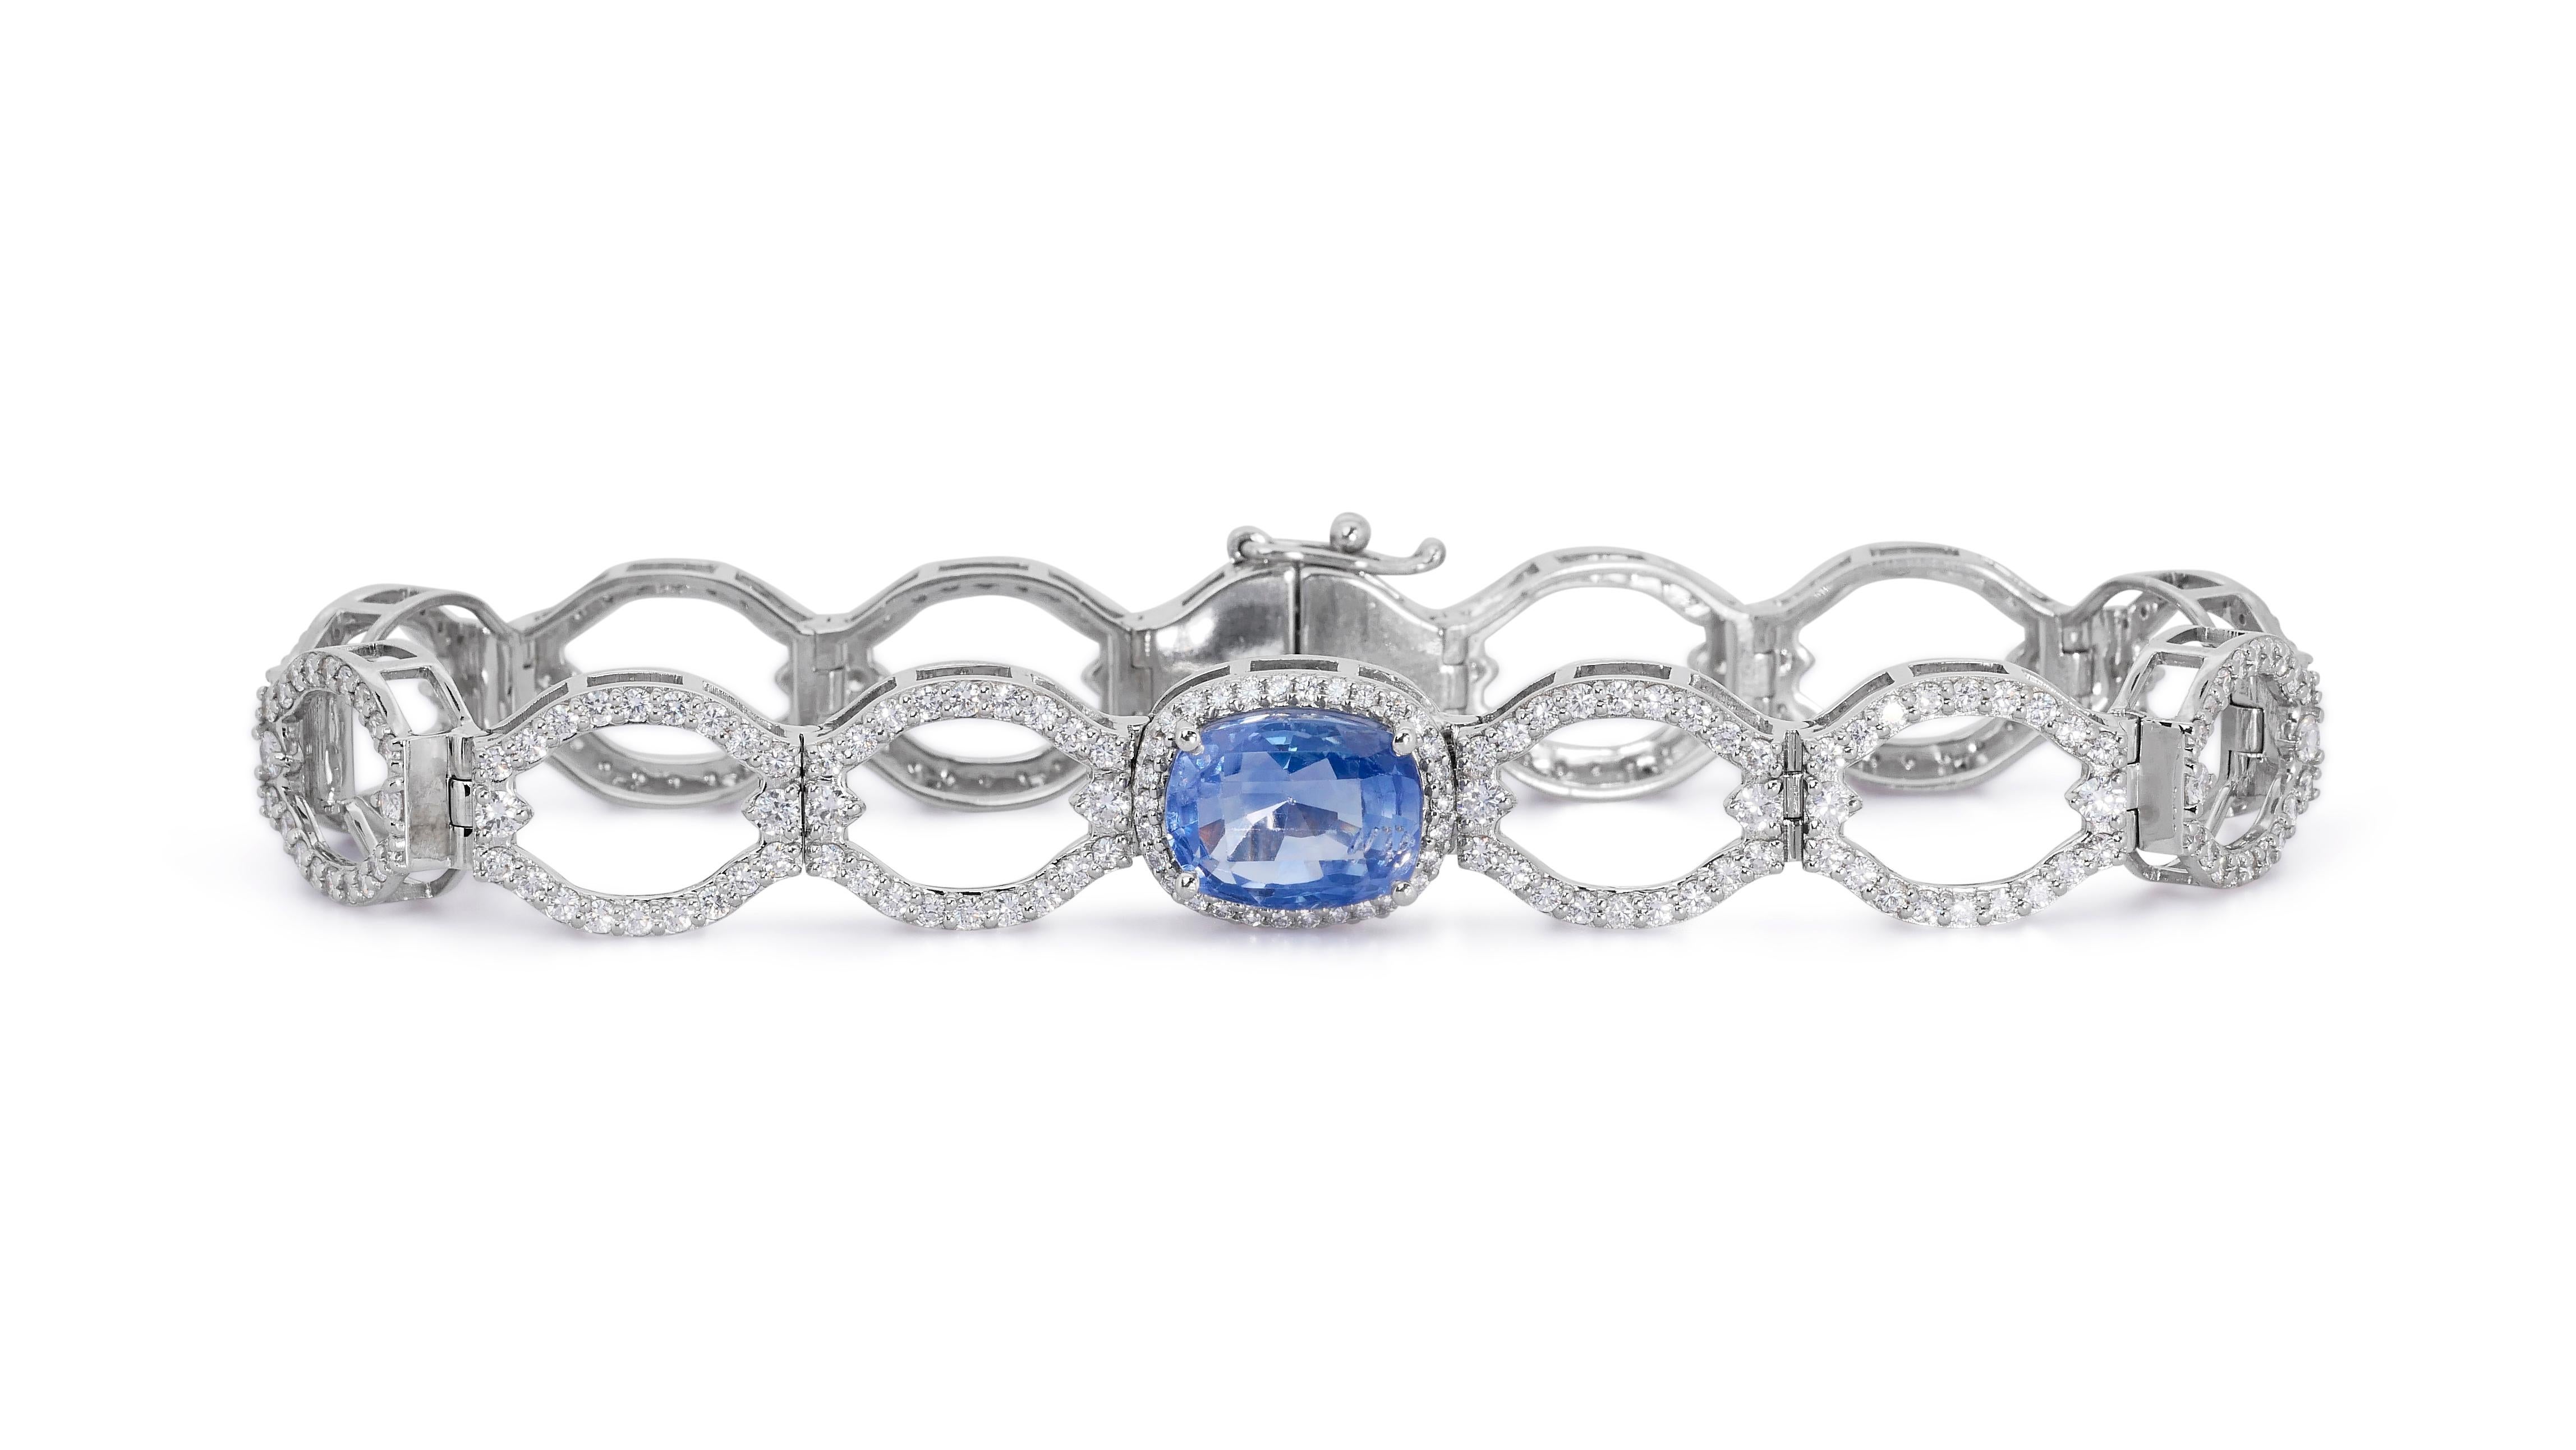 14k White Gold Bracelet w/ 9.72ct Natural Sapphire and Natural Diamonds GIA Cert For Sale 4